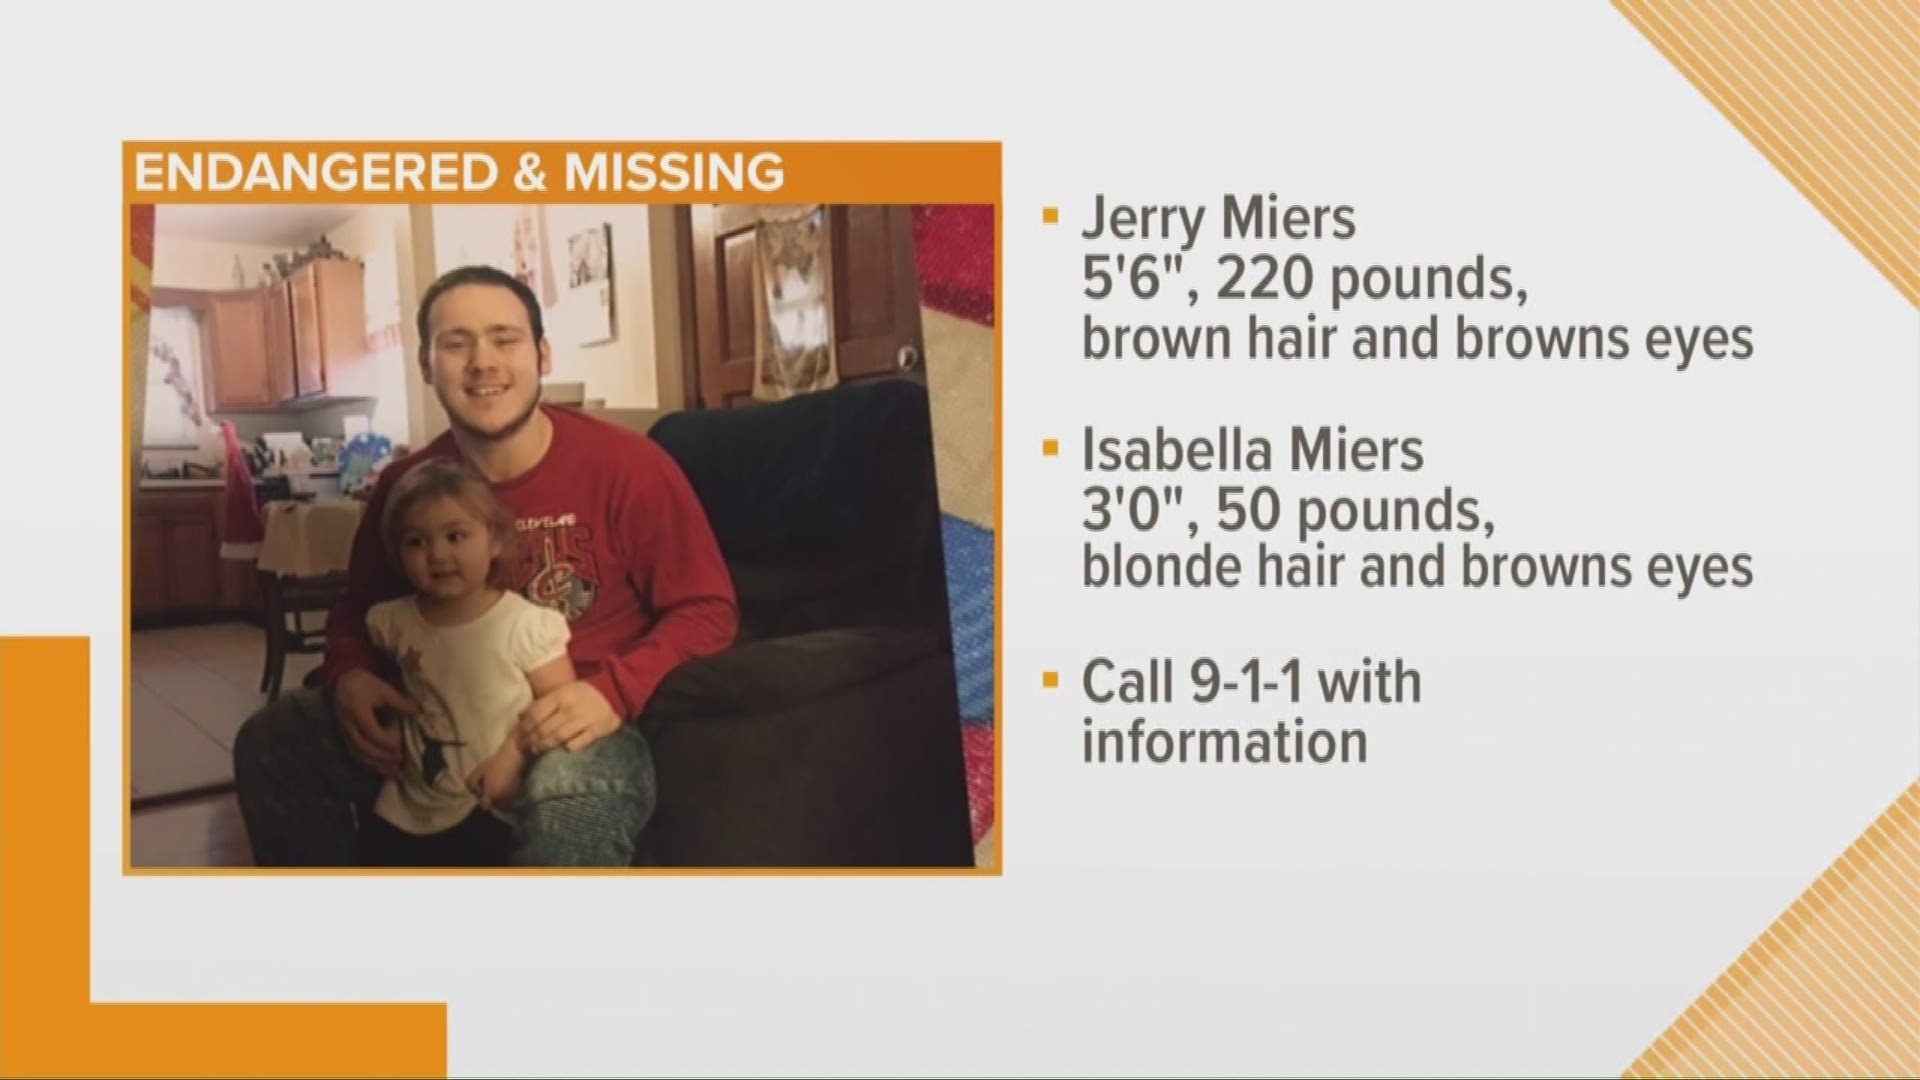 Sept. 16, 2019: Authorities are asking for the public’s help in finding a missing 20-year-old man and his 3-year-o0ld daughter who have both been listed by police as 'endangered.' The missing pair are described as follows: 20-year-old Jerry Miers is approximately 5’6” tall and weighs 220 pounds. He has brown hair and brown eyes. 3-year-old Isabella Miers is 3’ tall and weighs 50 pounds. She has blonde hair and brown eyes.